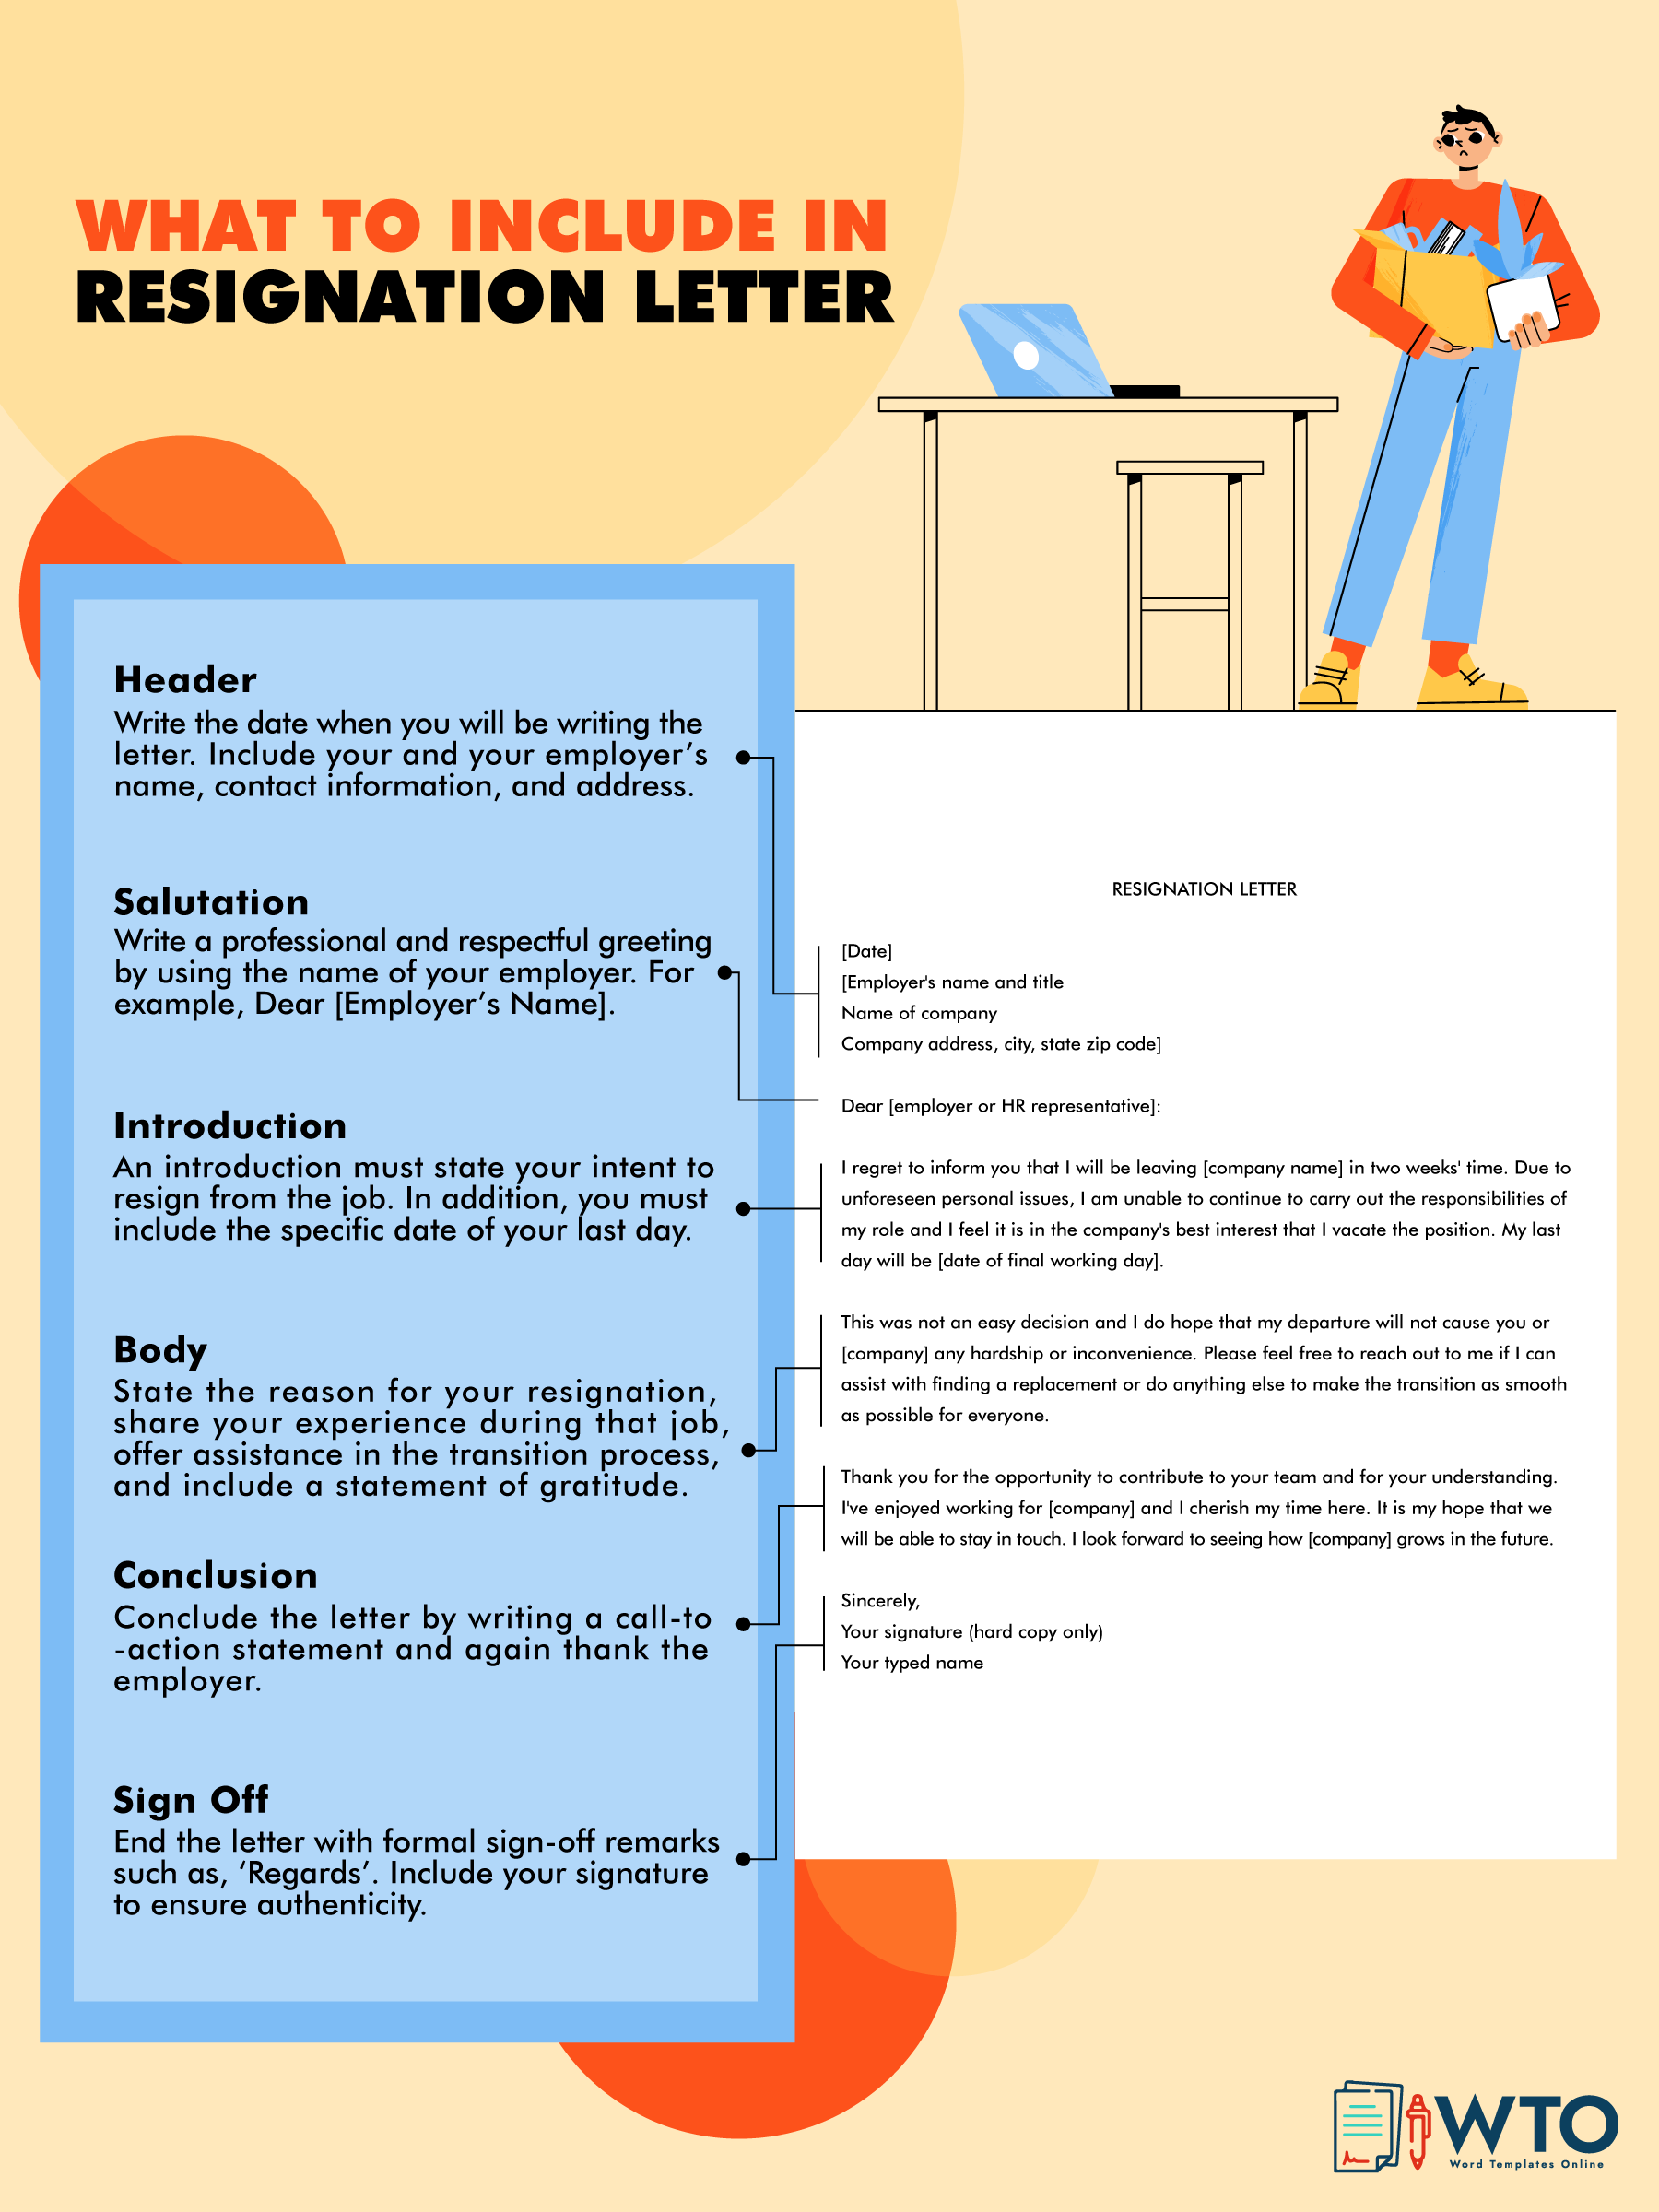 This infographic tells about what to include in a resignation letter.